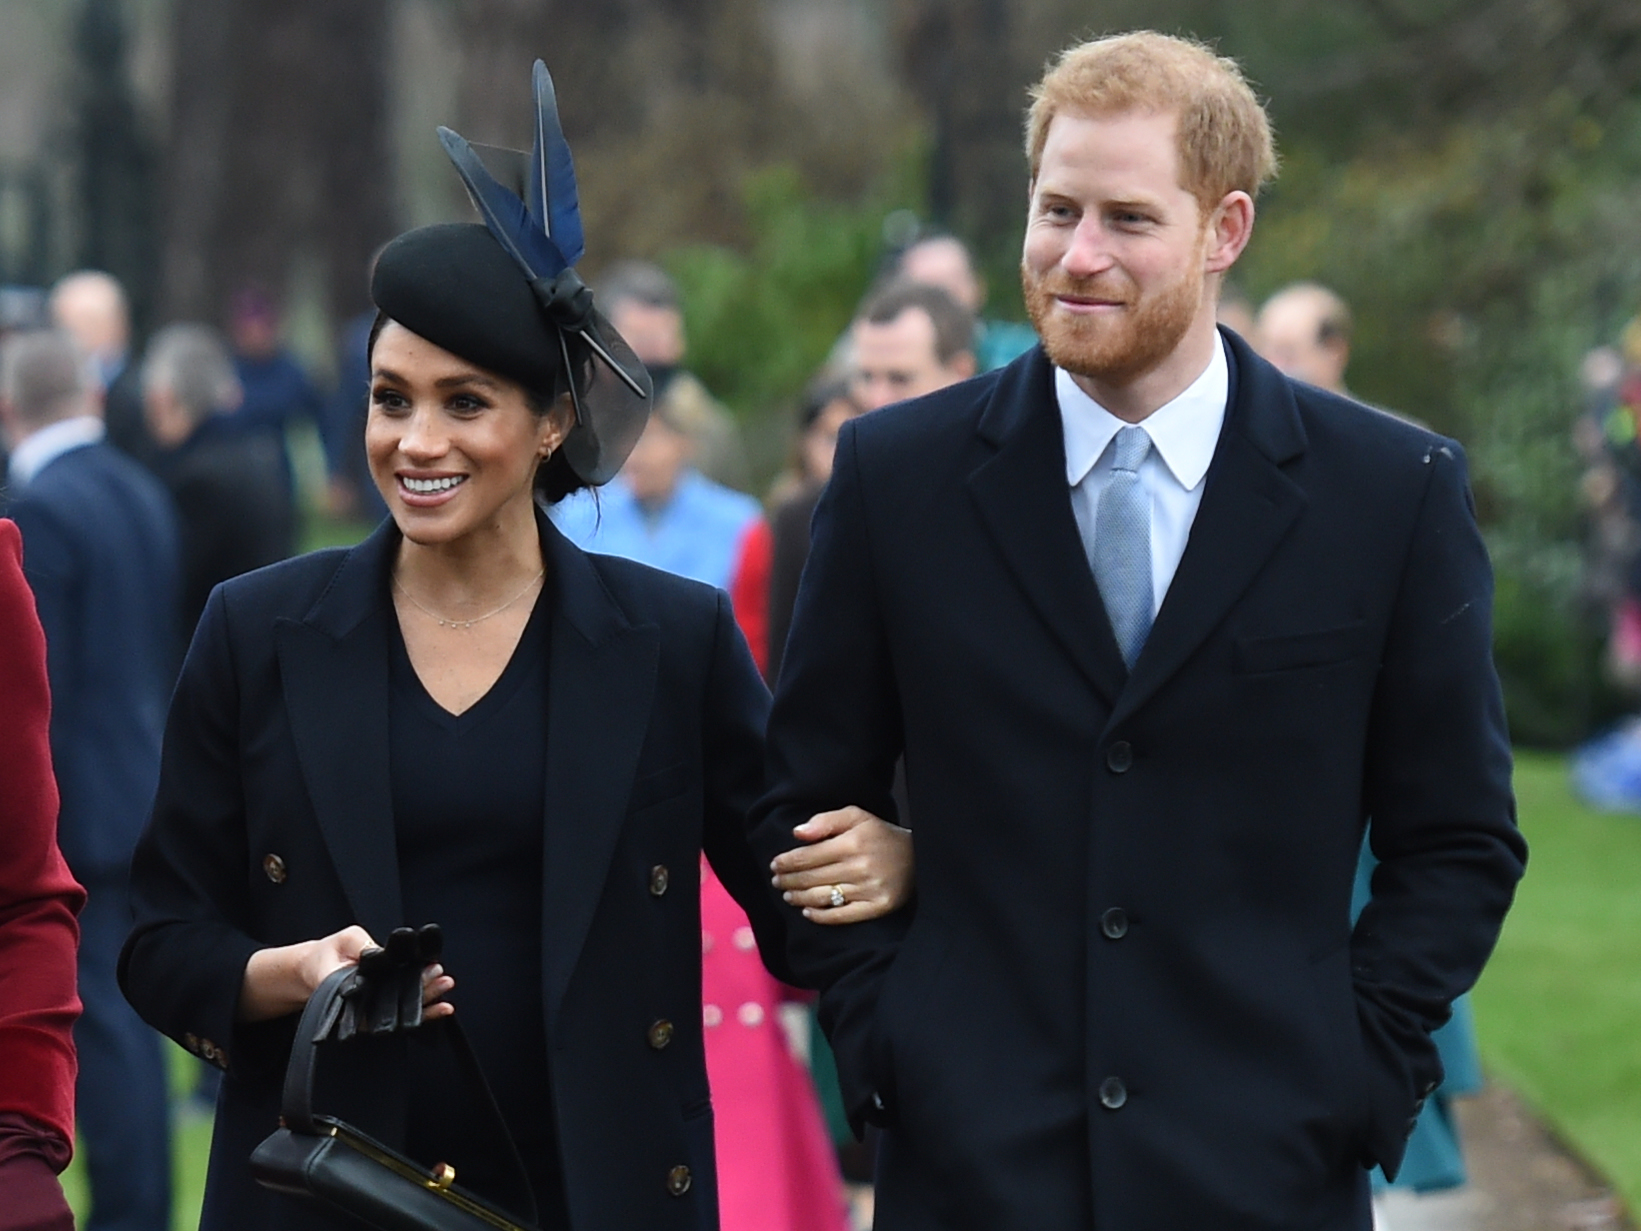 Meghan Markle and Prince Harry walking arm-in-arm to the Christmas Day service at St Mary Magdalene Church in 2018